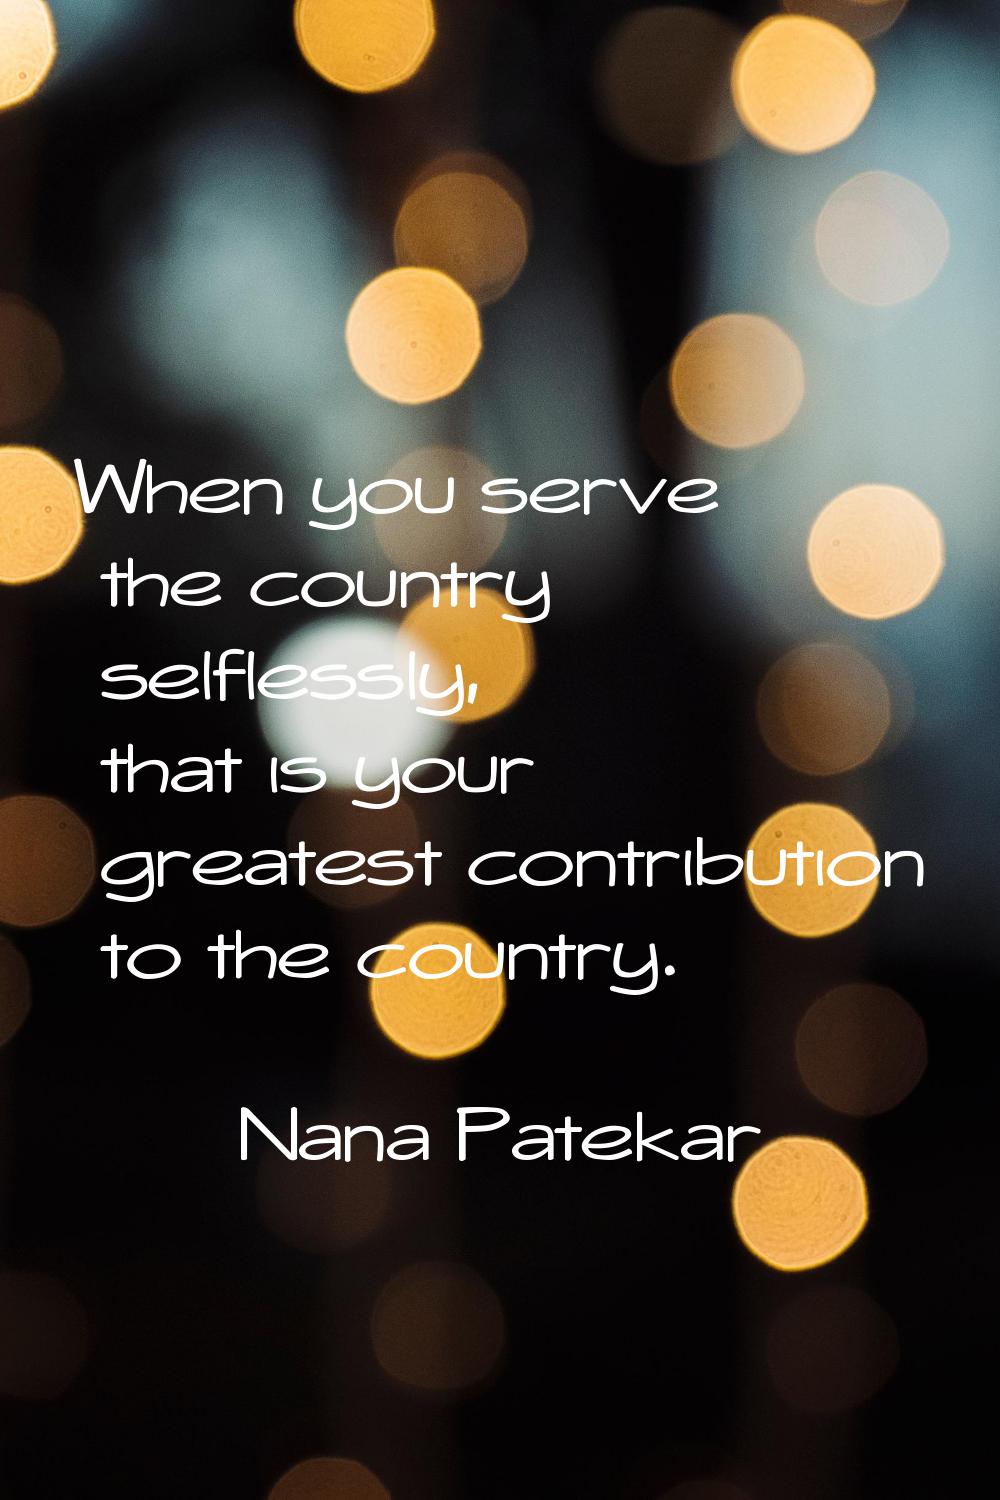 When you serve the country selflessly, that is your greatest contribution to the country.